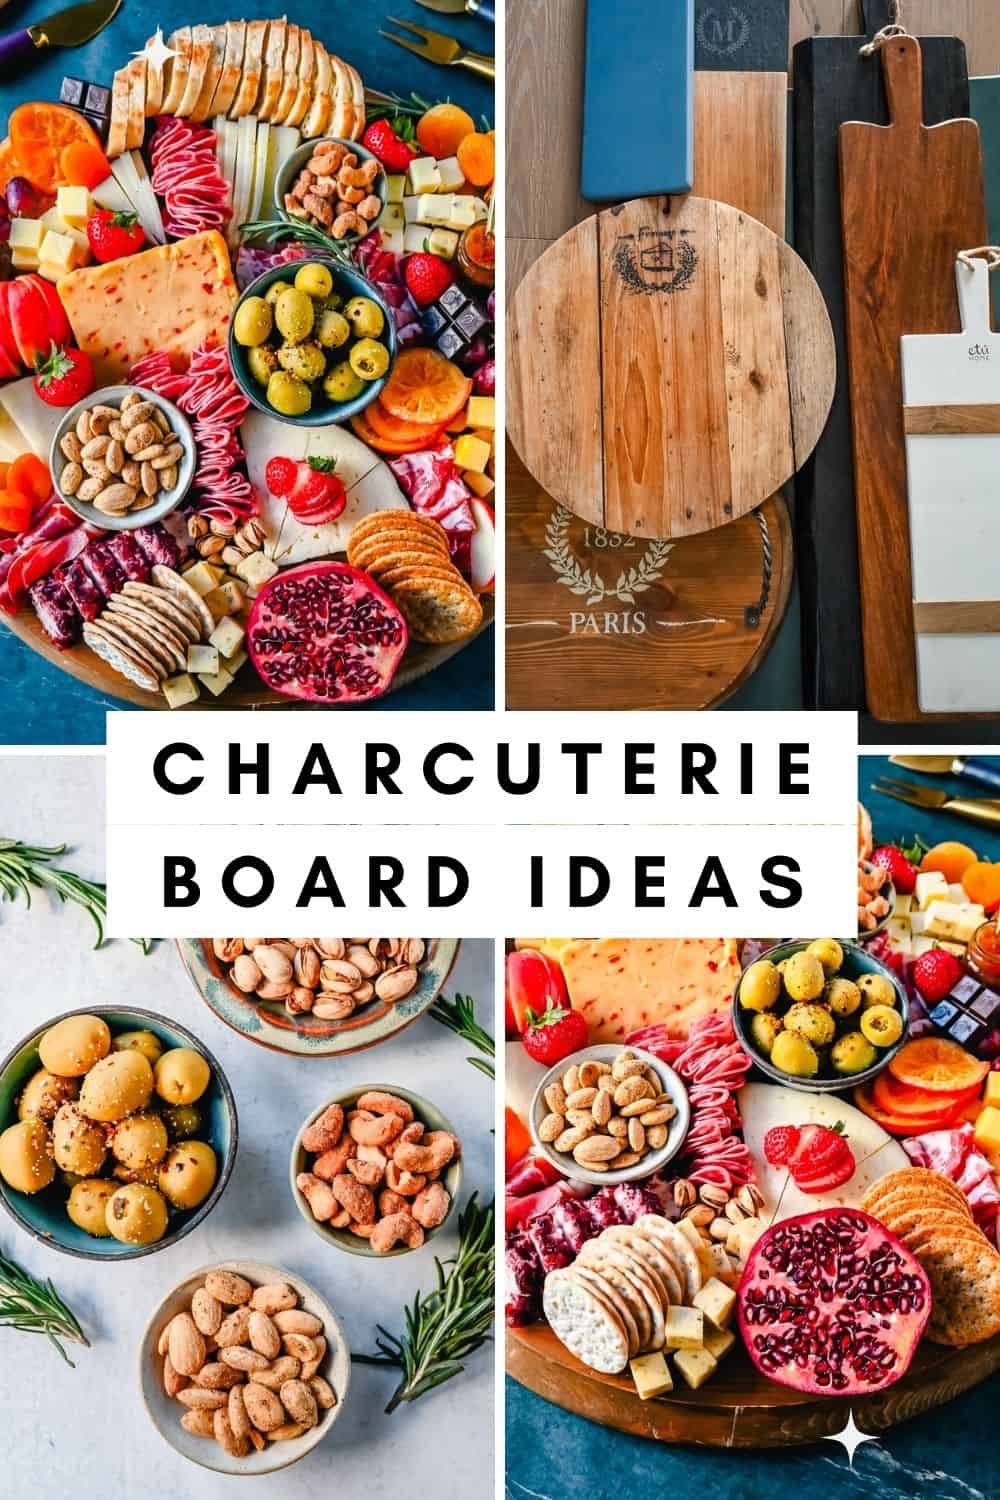 How to make the Best Charcuterie Board. An essential guide to everything about charcuterie boards from what to put on charcuterie boards to the best cheeses for charcuterie to the best wood boards and where to buy ingredients for charcuterie boards. This is the ultimate guide to making the best charcuterie board!